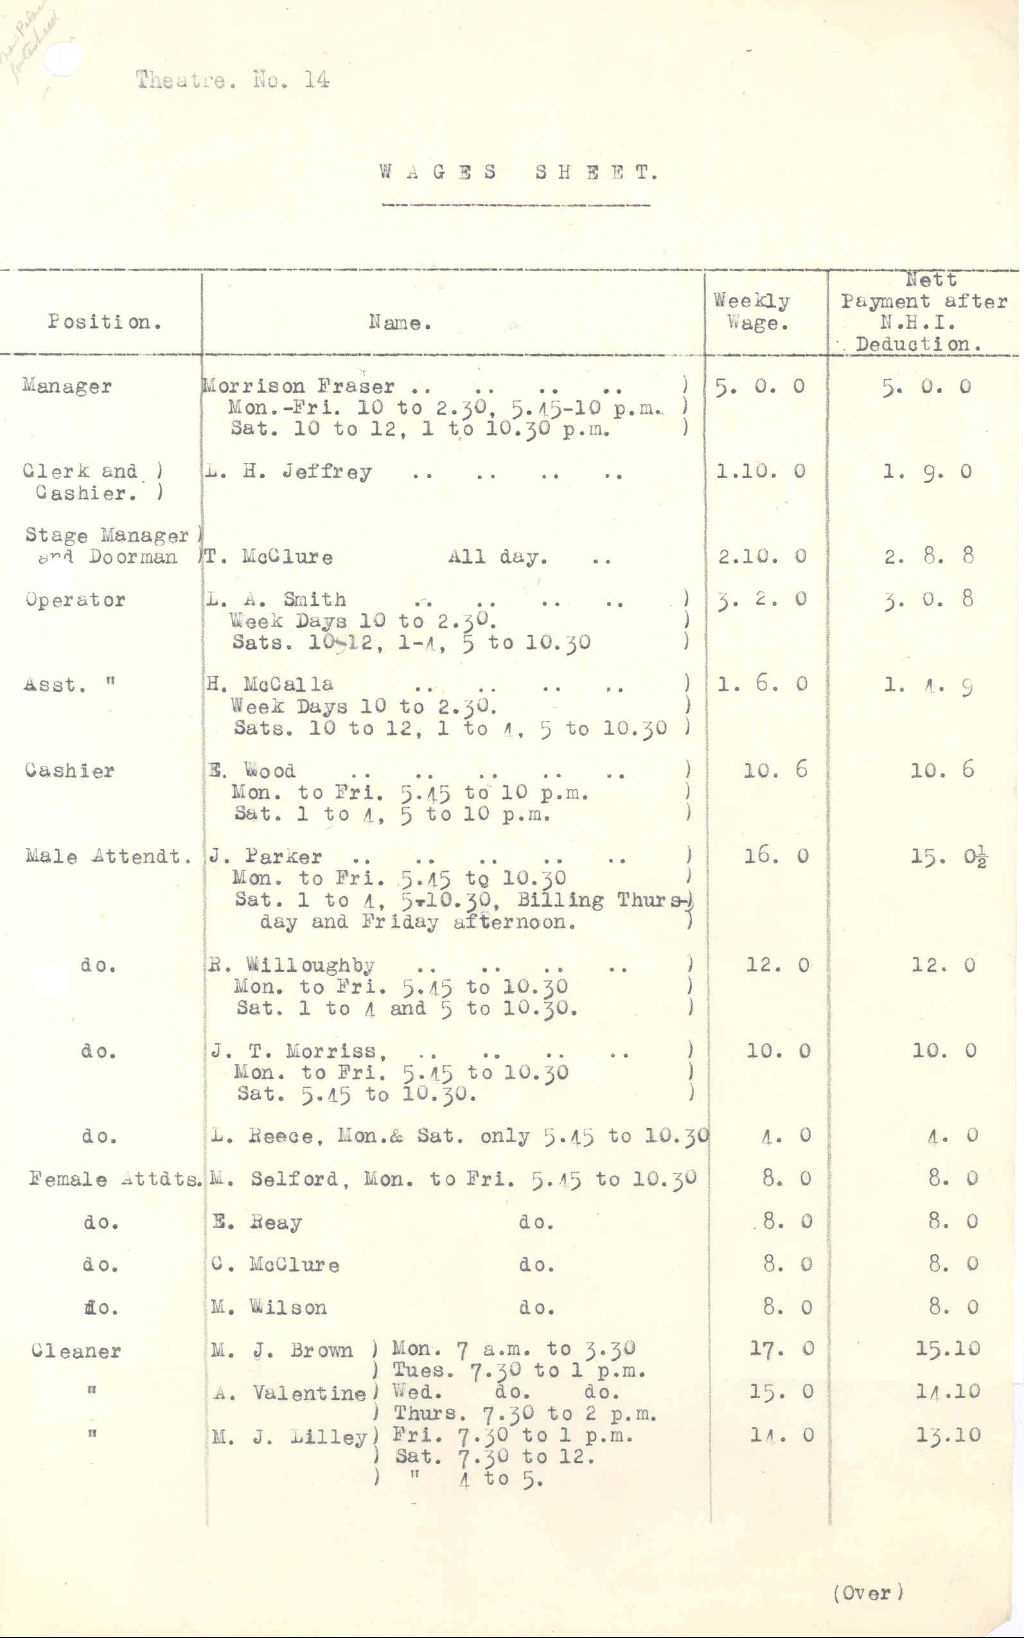 Wages sheet for cinema employees, 1931